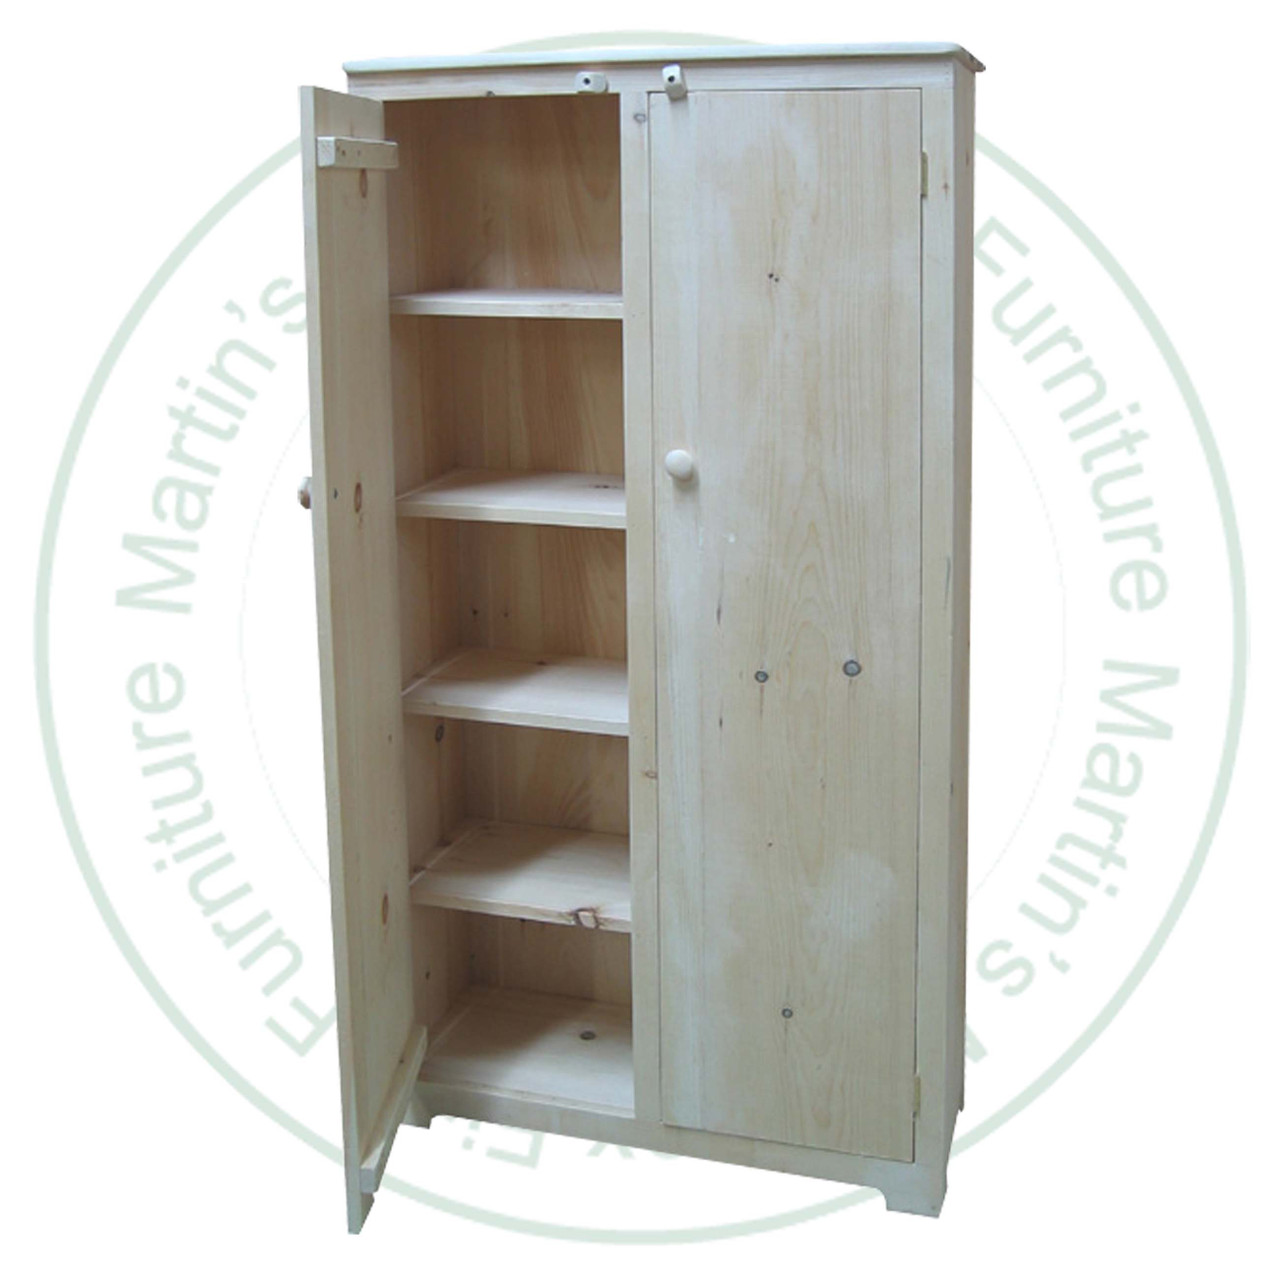 Maple Nith River Jam Cupboard 12''D x 22''W x 84''H With 2 Doors